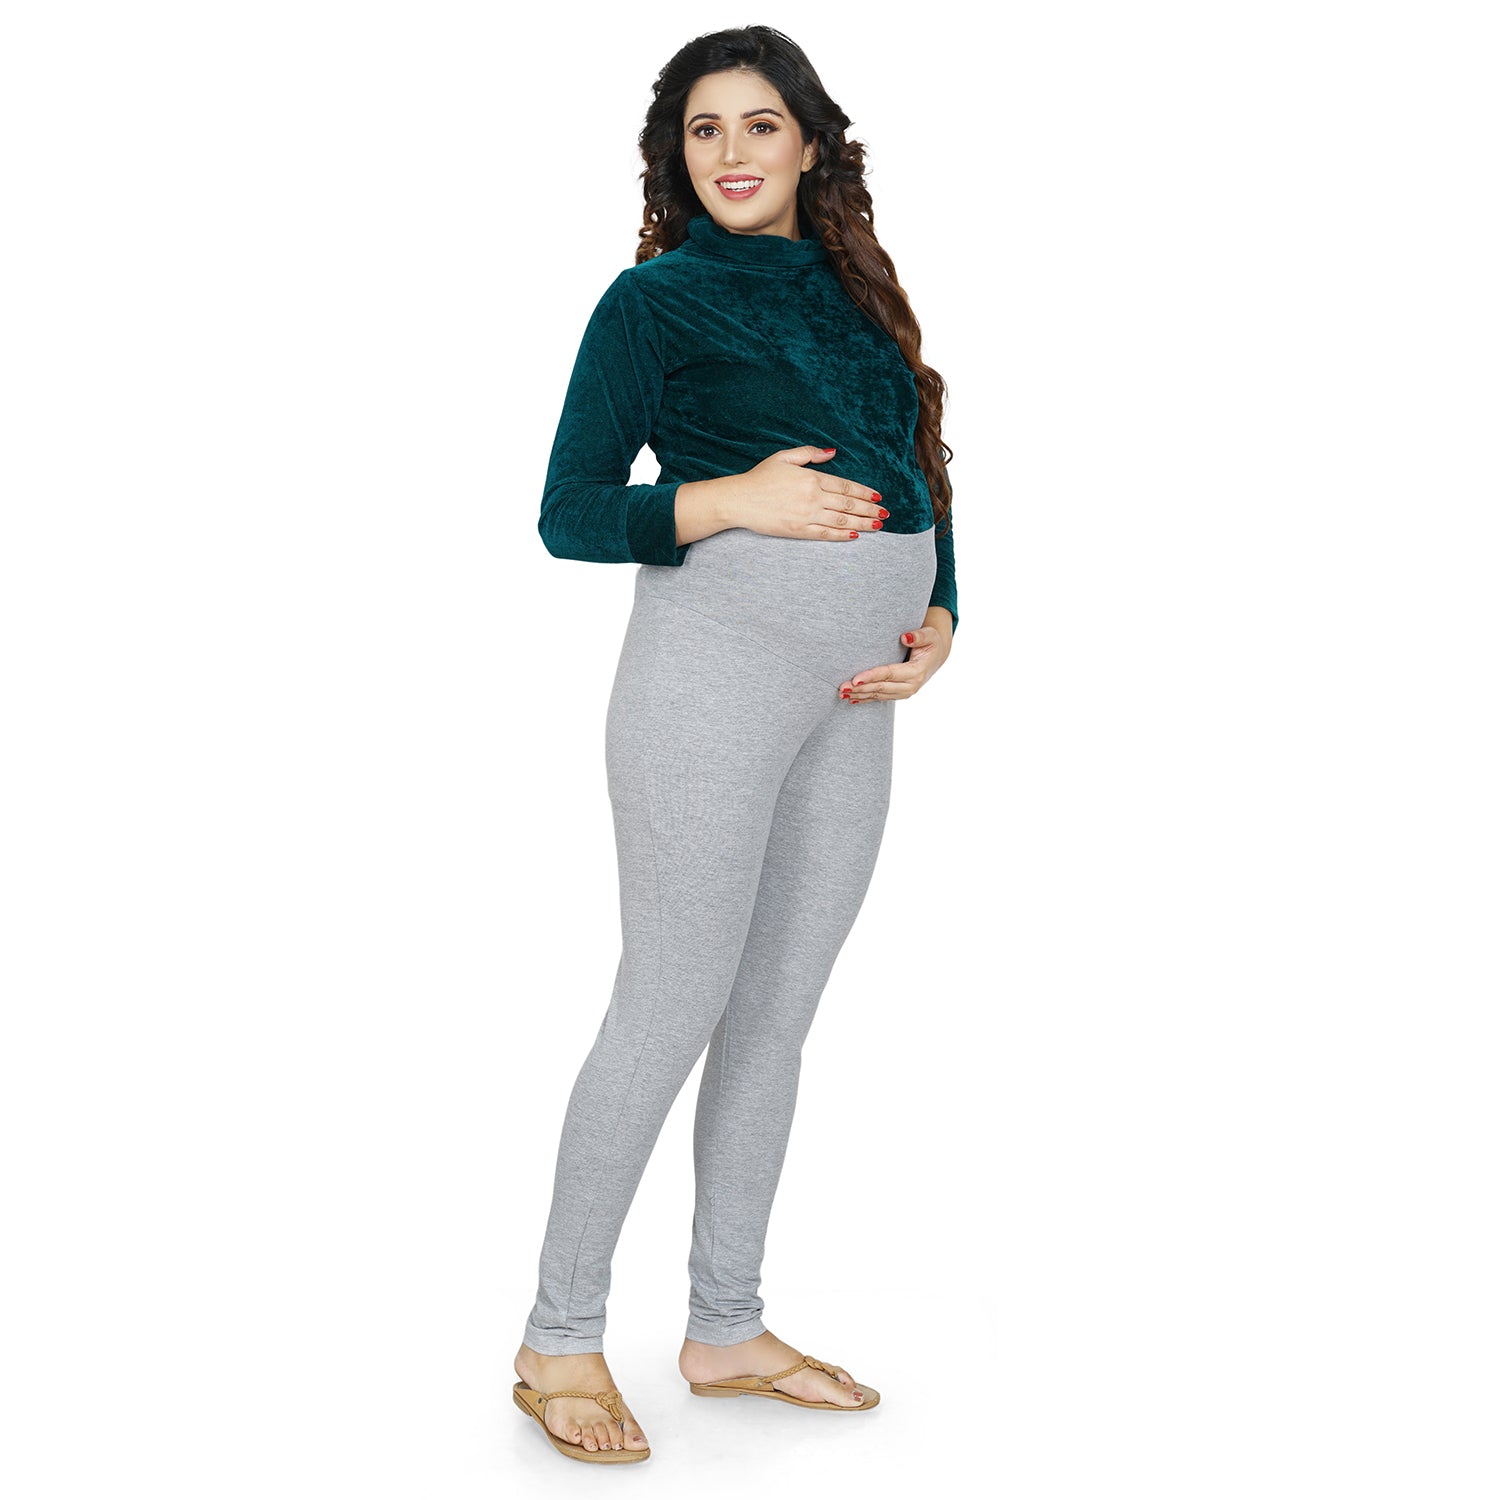 Baby Moo Soft And Comfy Full Length Maternity Leggings Solid - Grey - Baby Moo